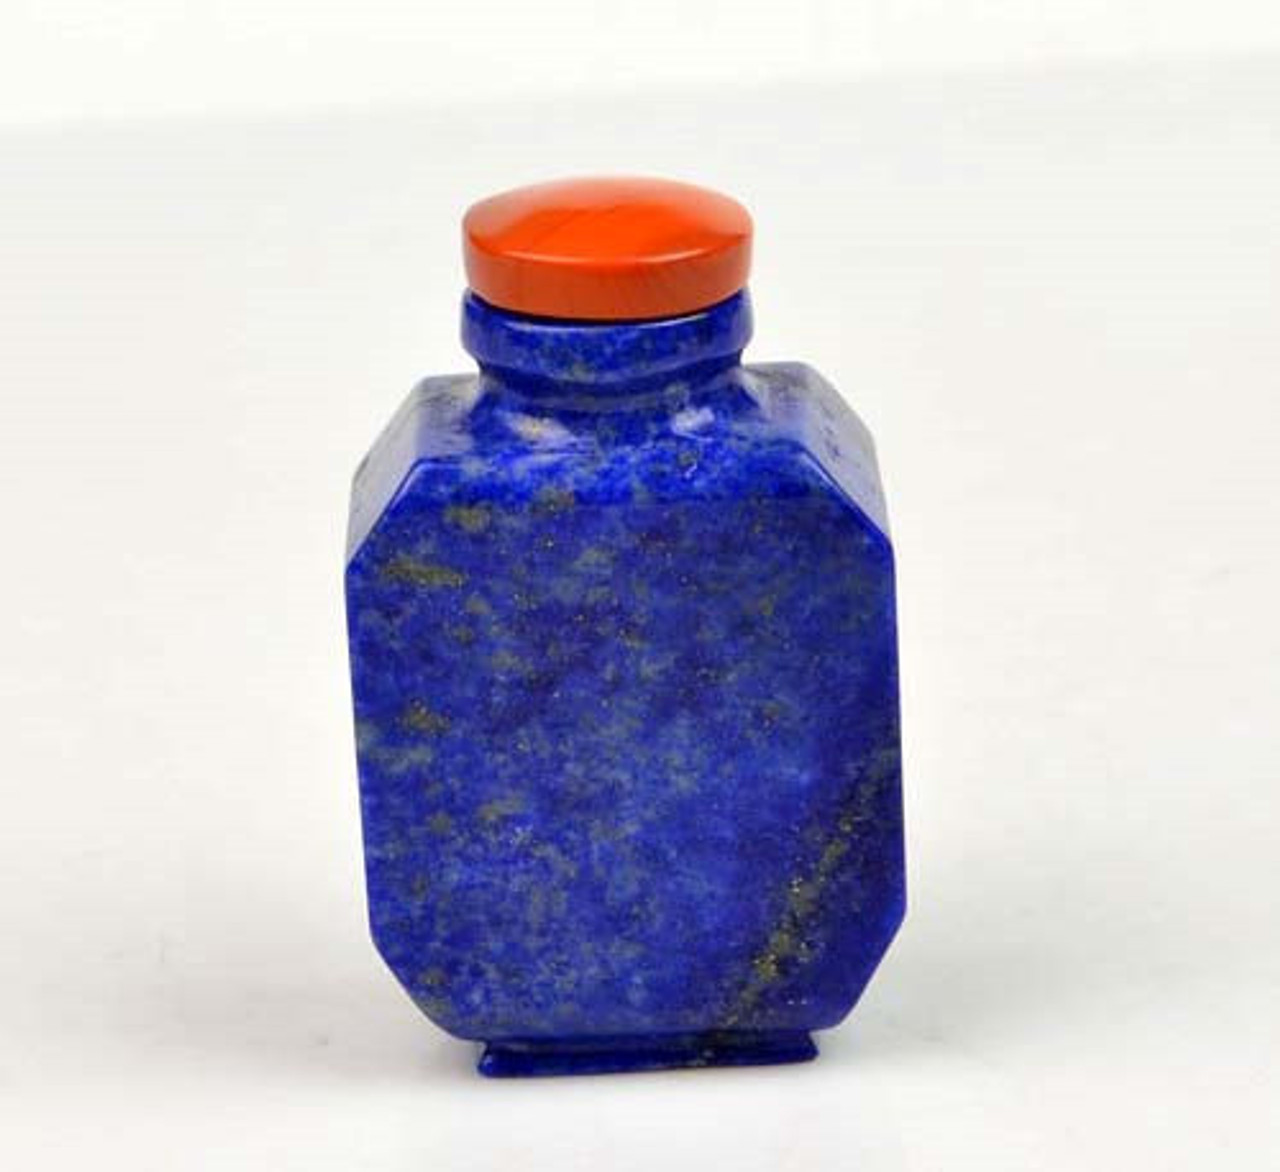 Hand Carved Natural Lapis Lazuli Snuff Bottle Chinese Carving -N009182